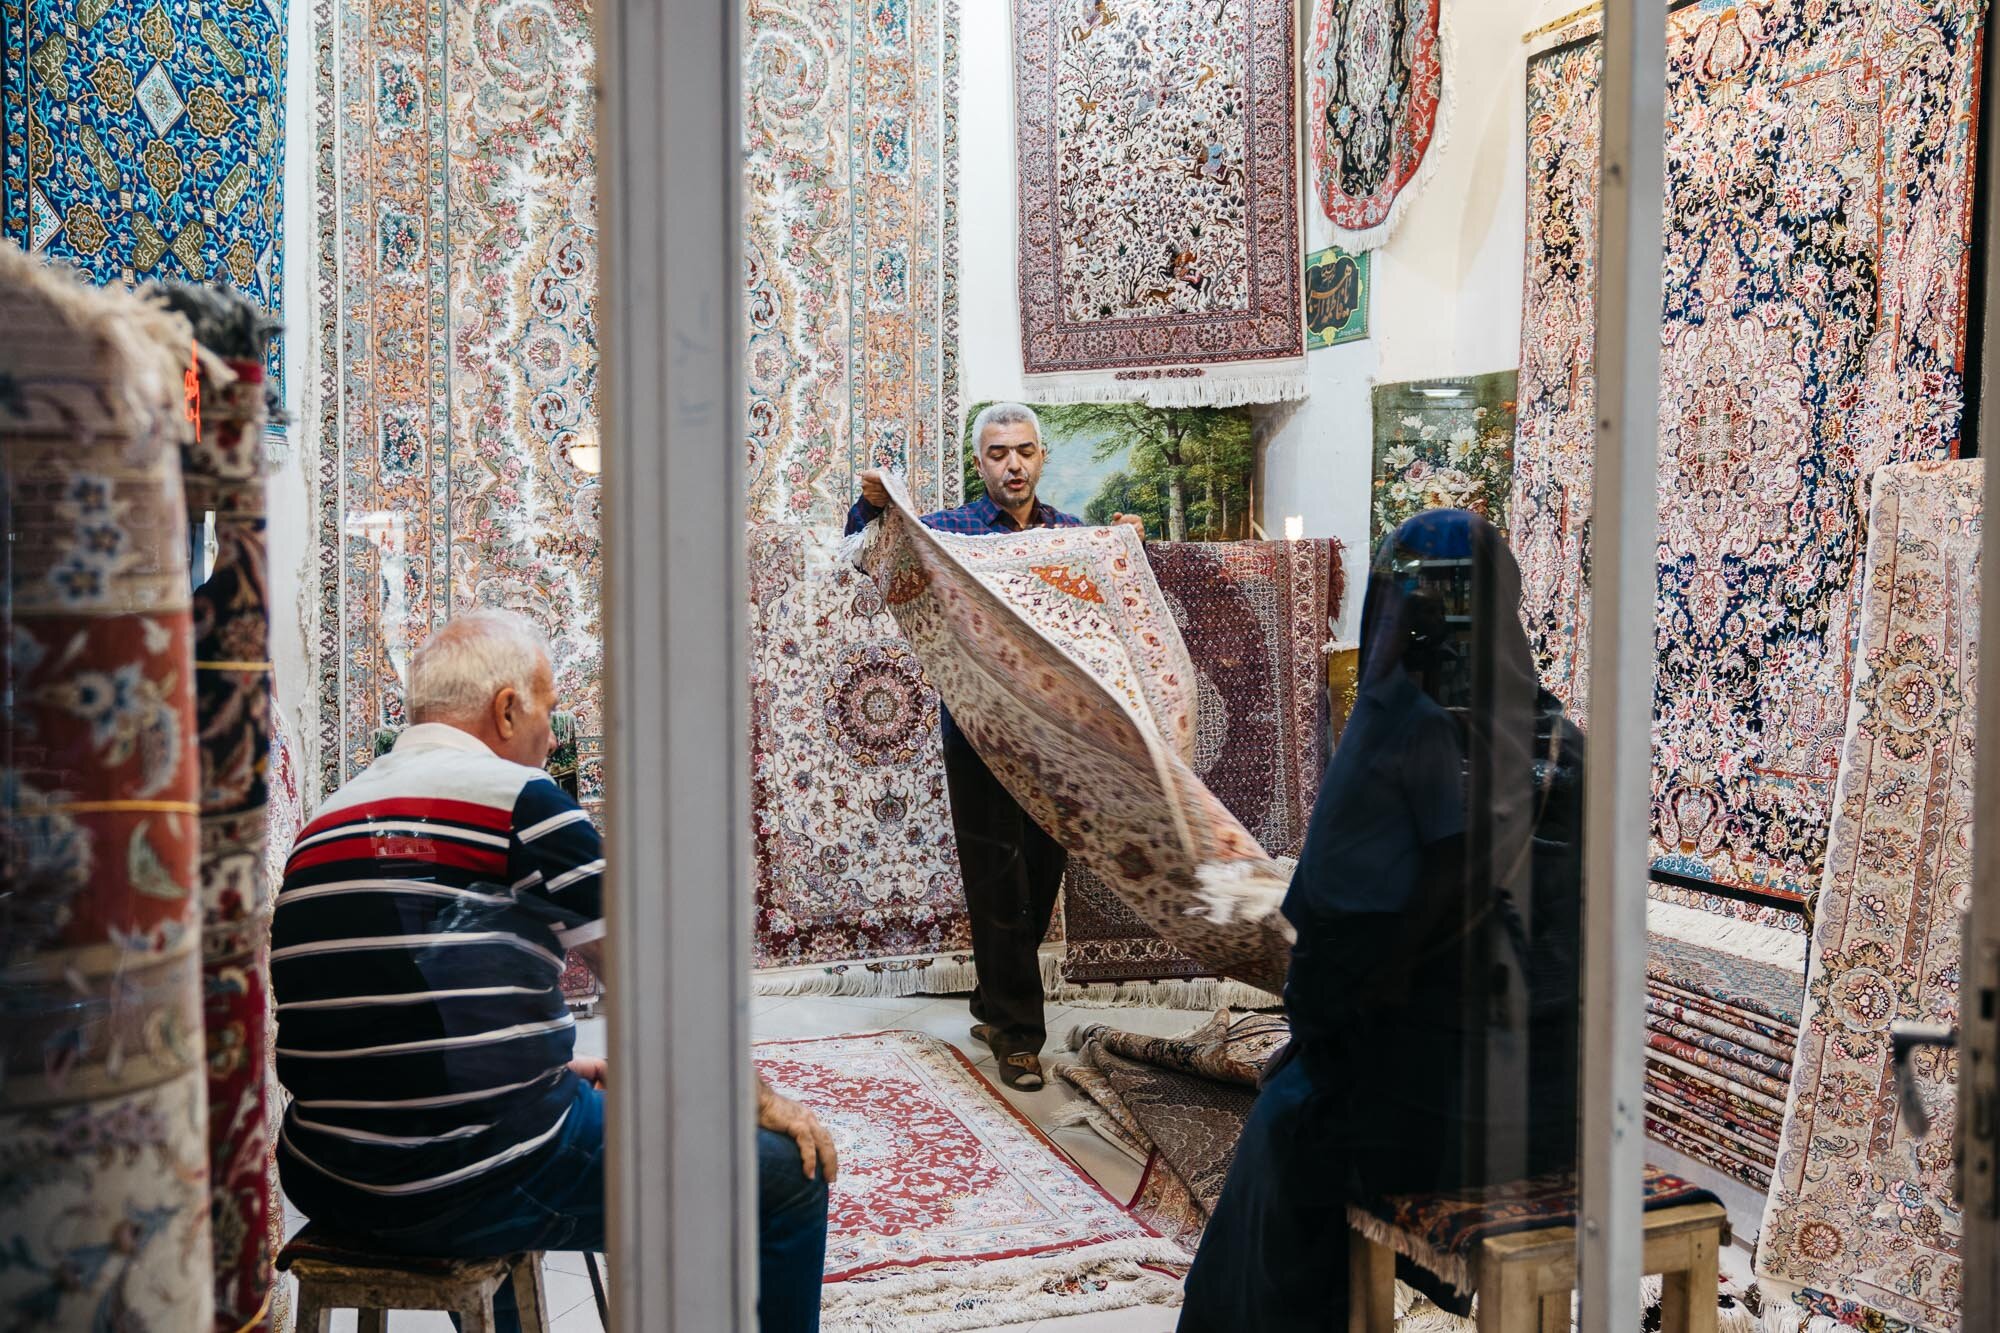  A carpet seller displaying a rug to potential buyers. He is showing off fine silk carpets. 